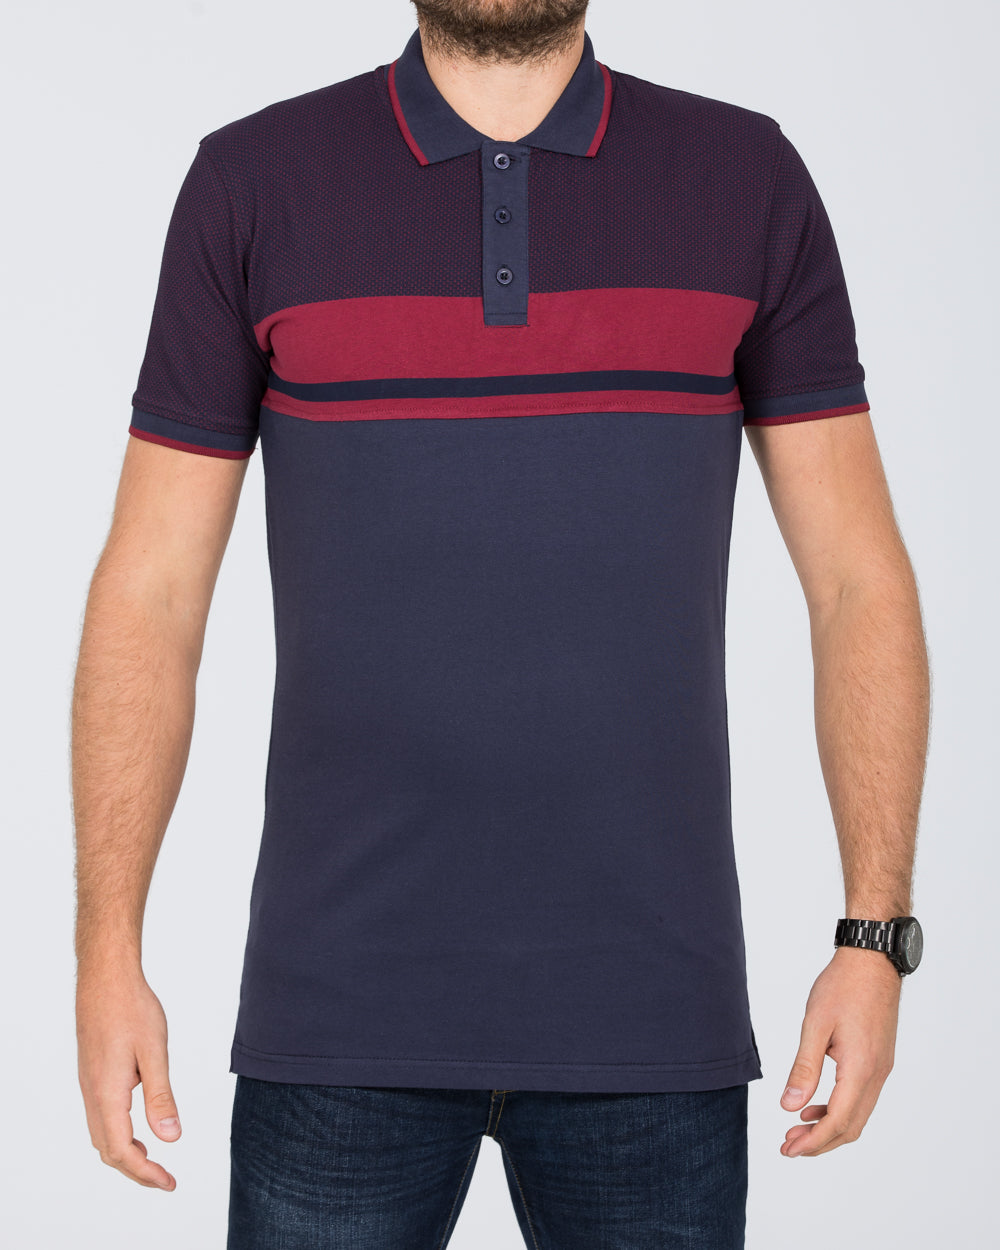 2t Slim Fit Tall Cut and Sew Polo Shirt (burgundy)